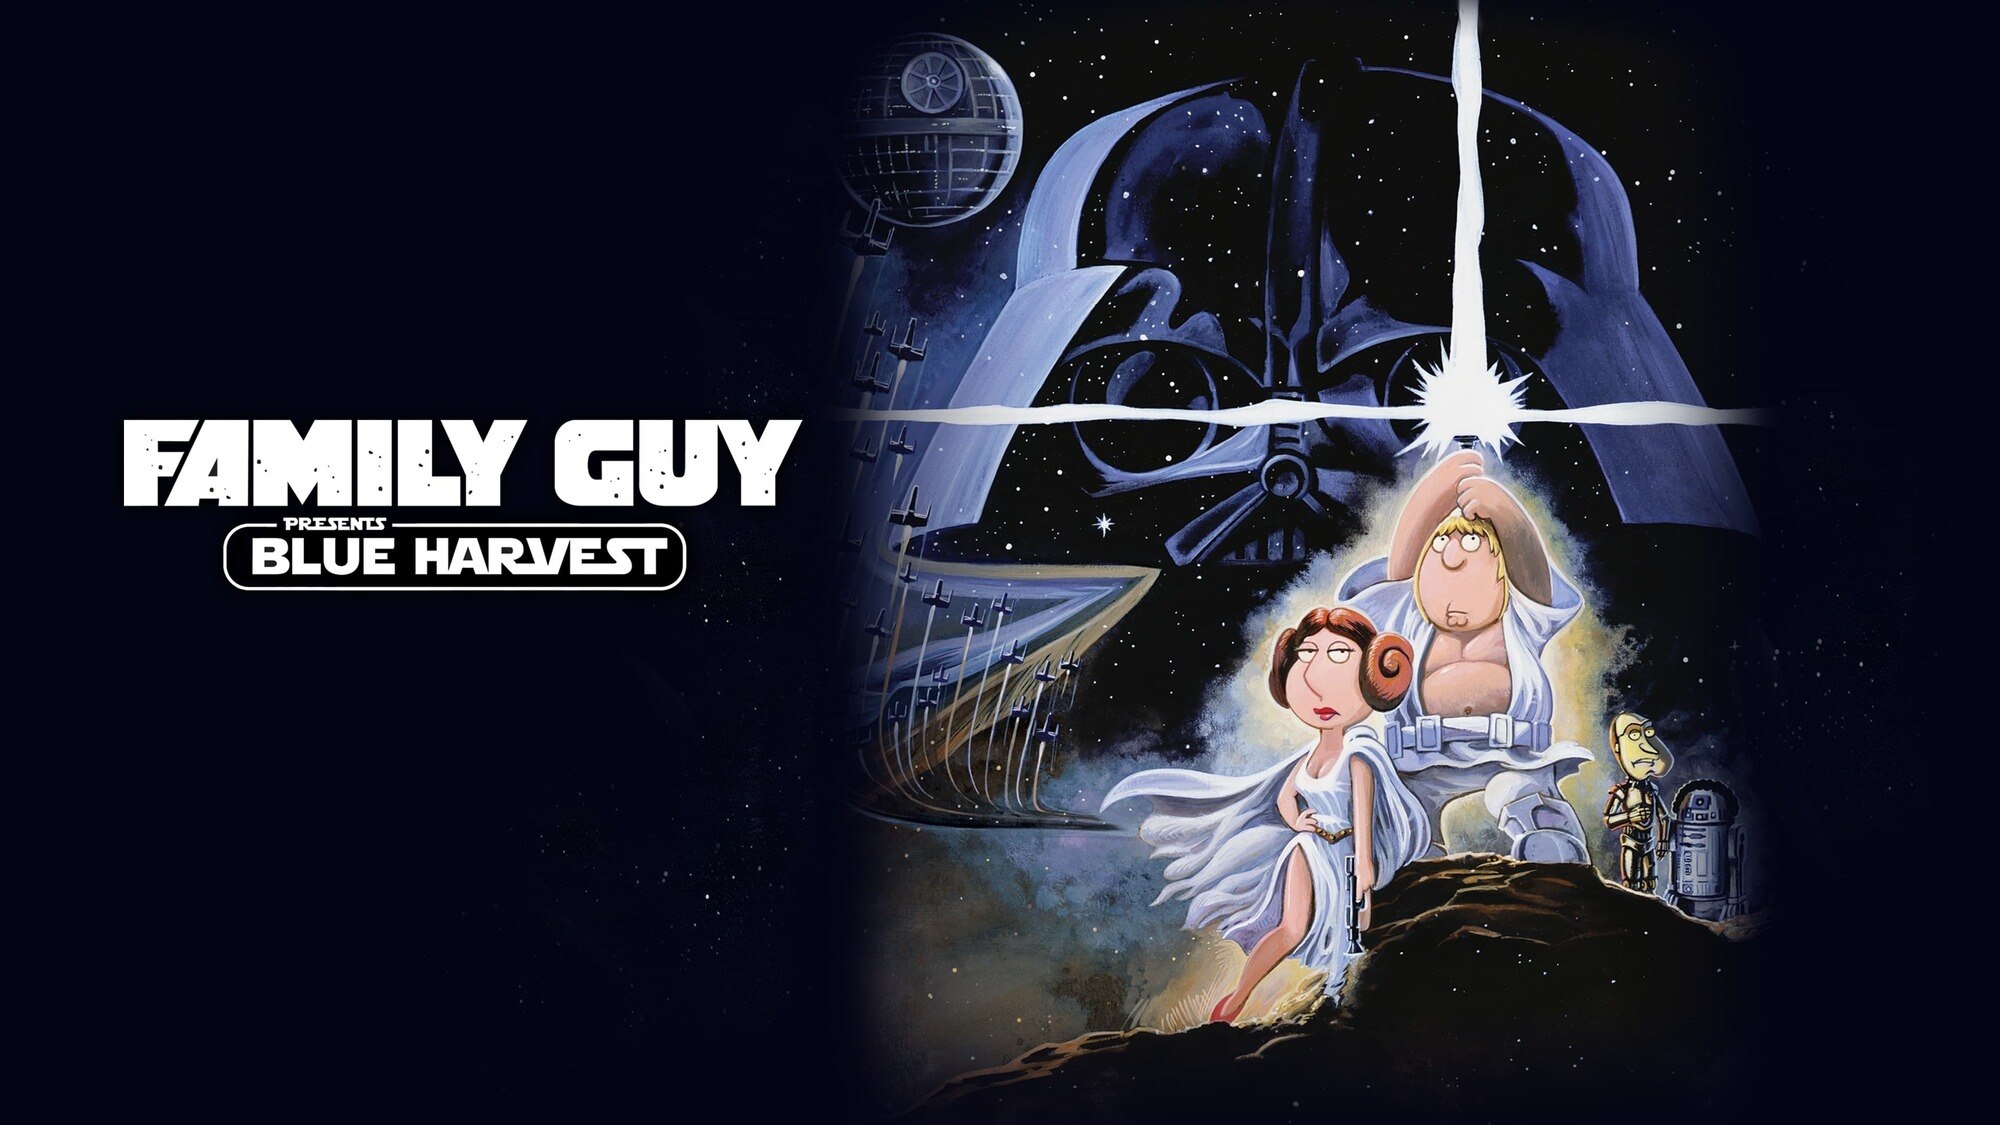 36-facts-about-the-movie-family-guy-blue-harvest